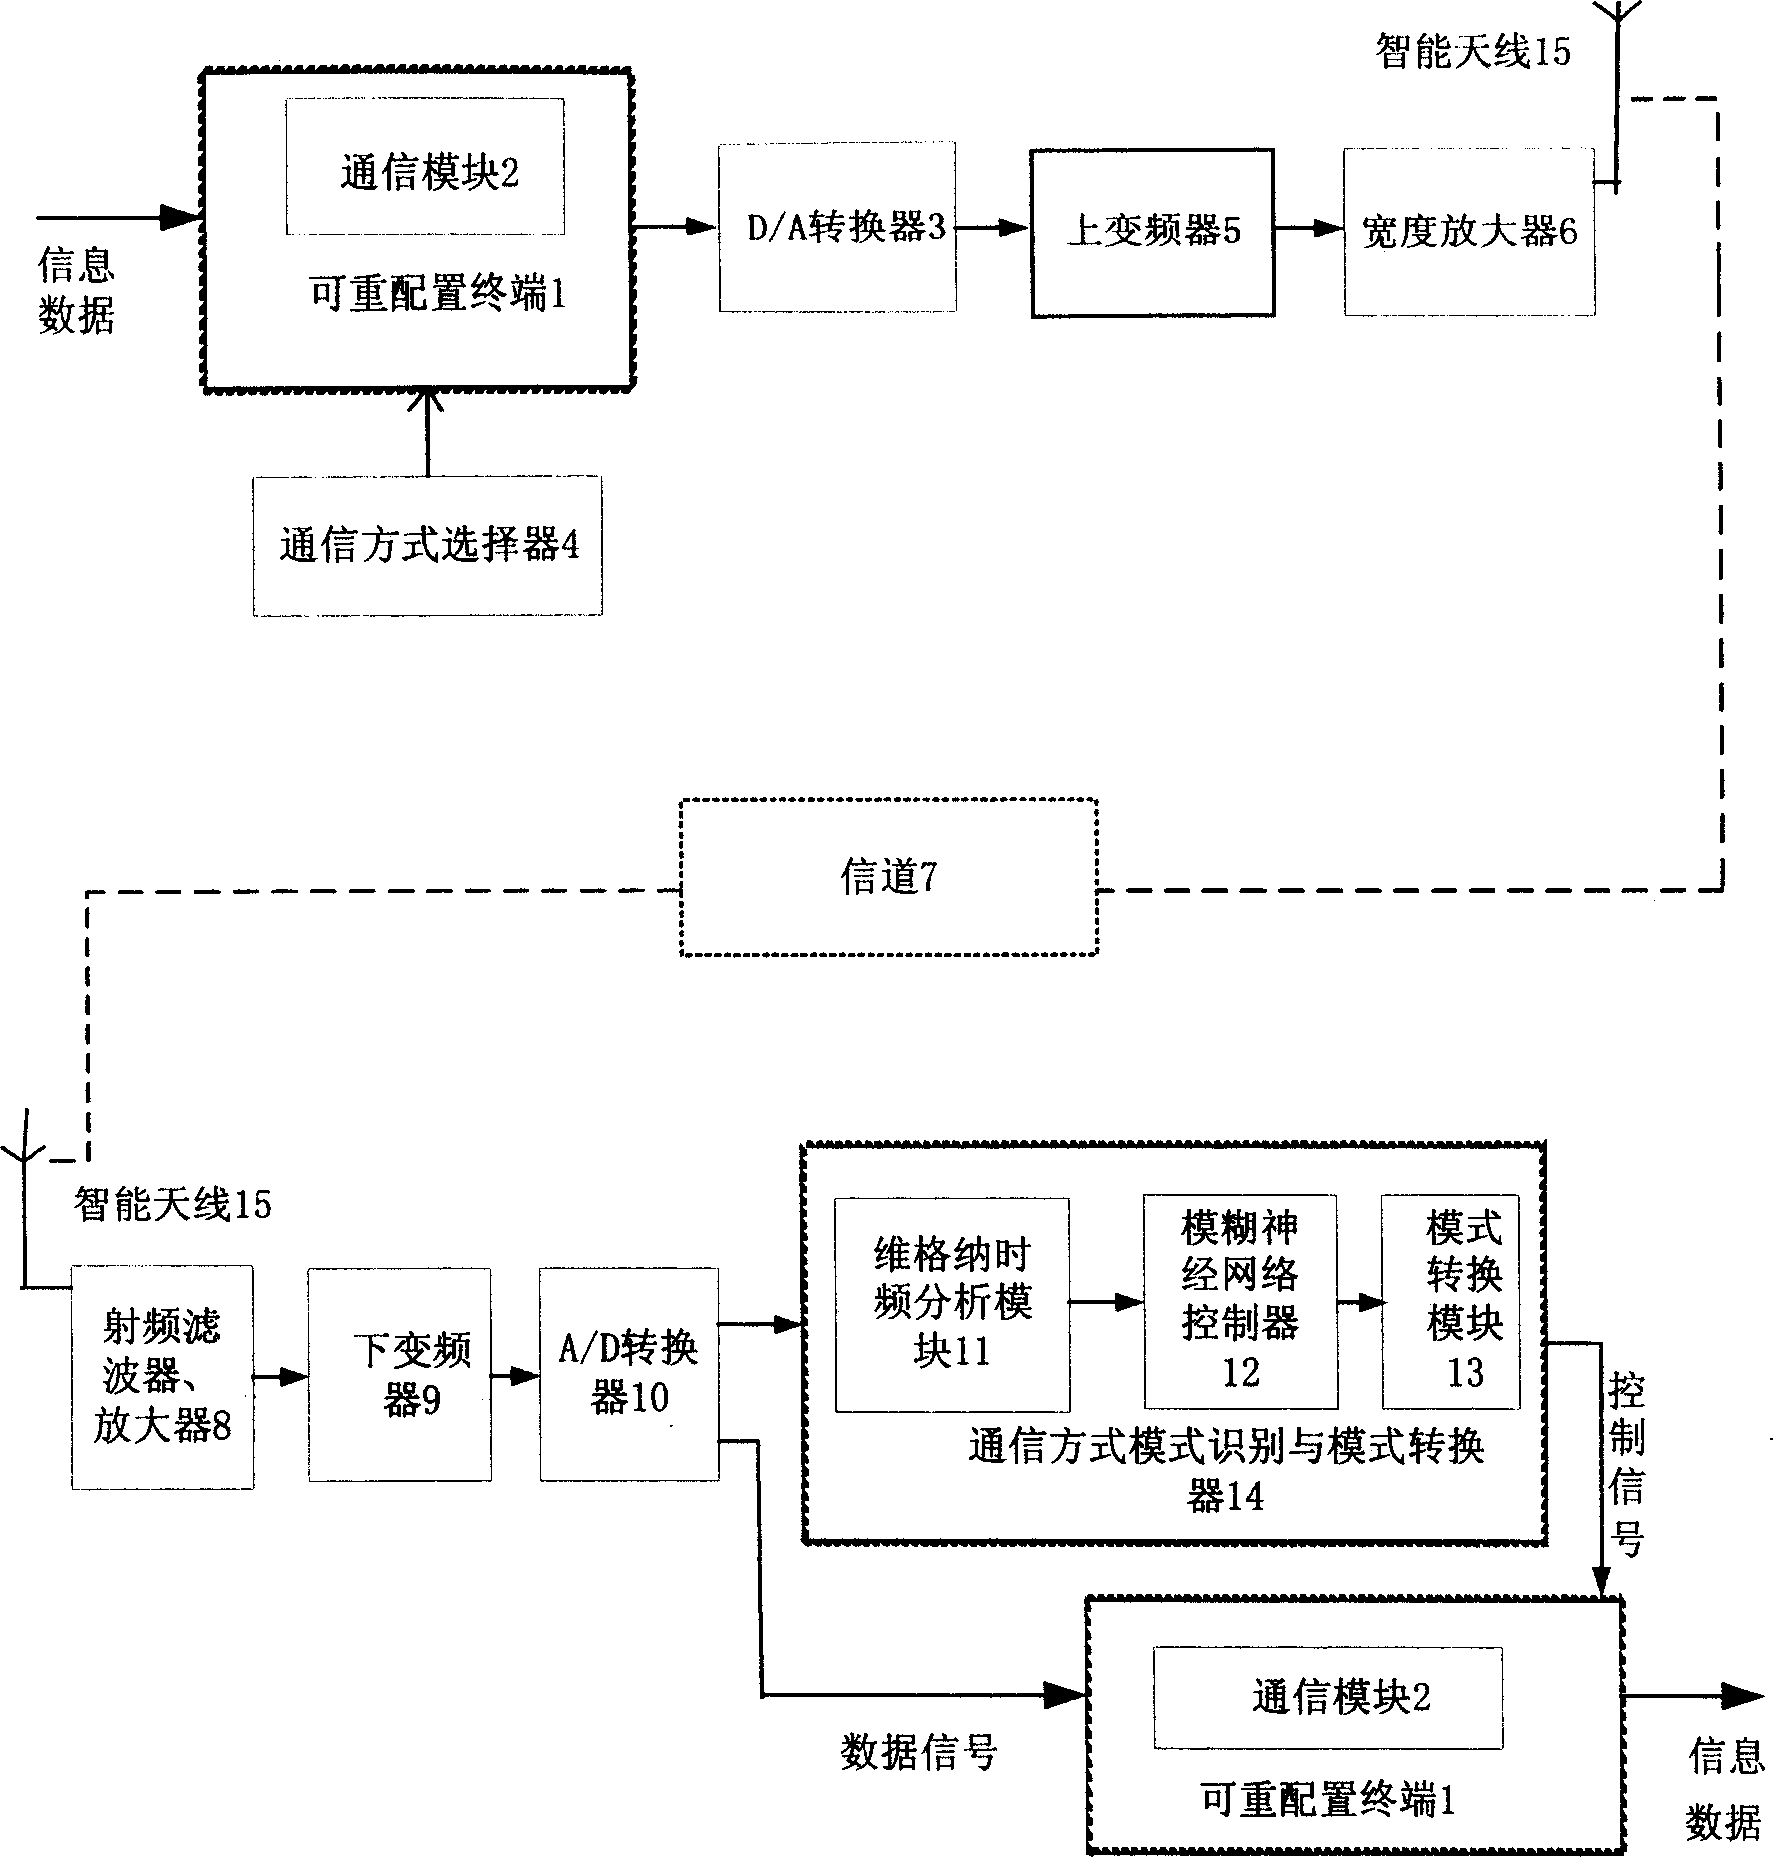 Multi-mode mobile communication terminal and its signal processing method